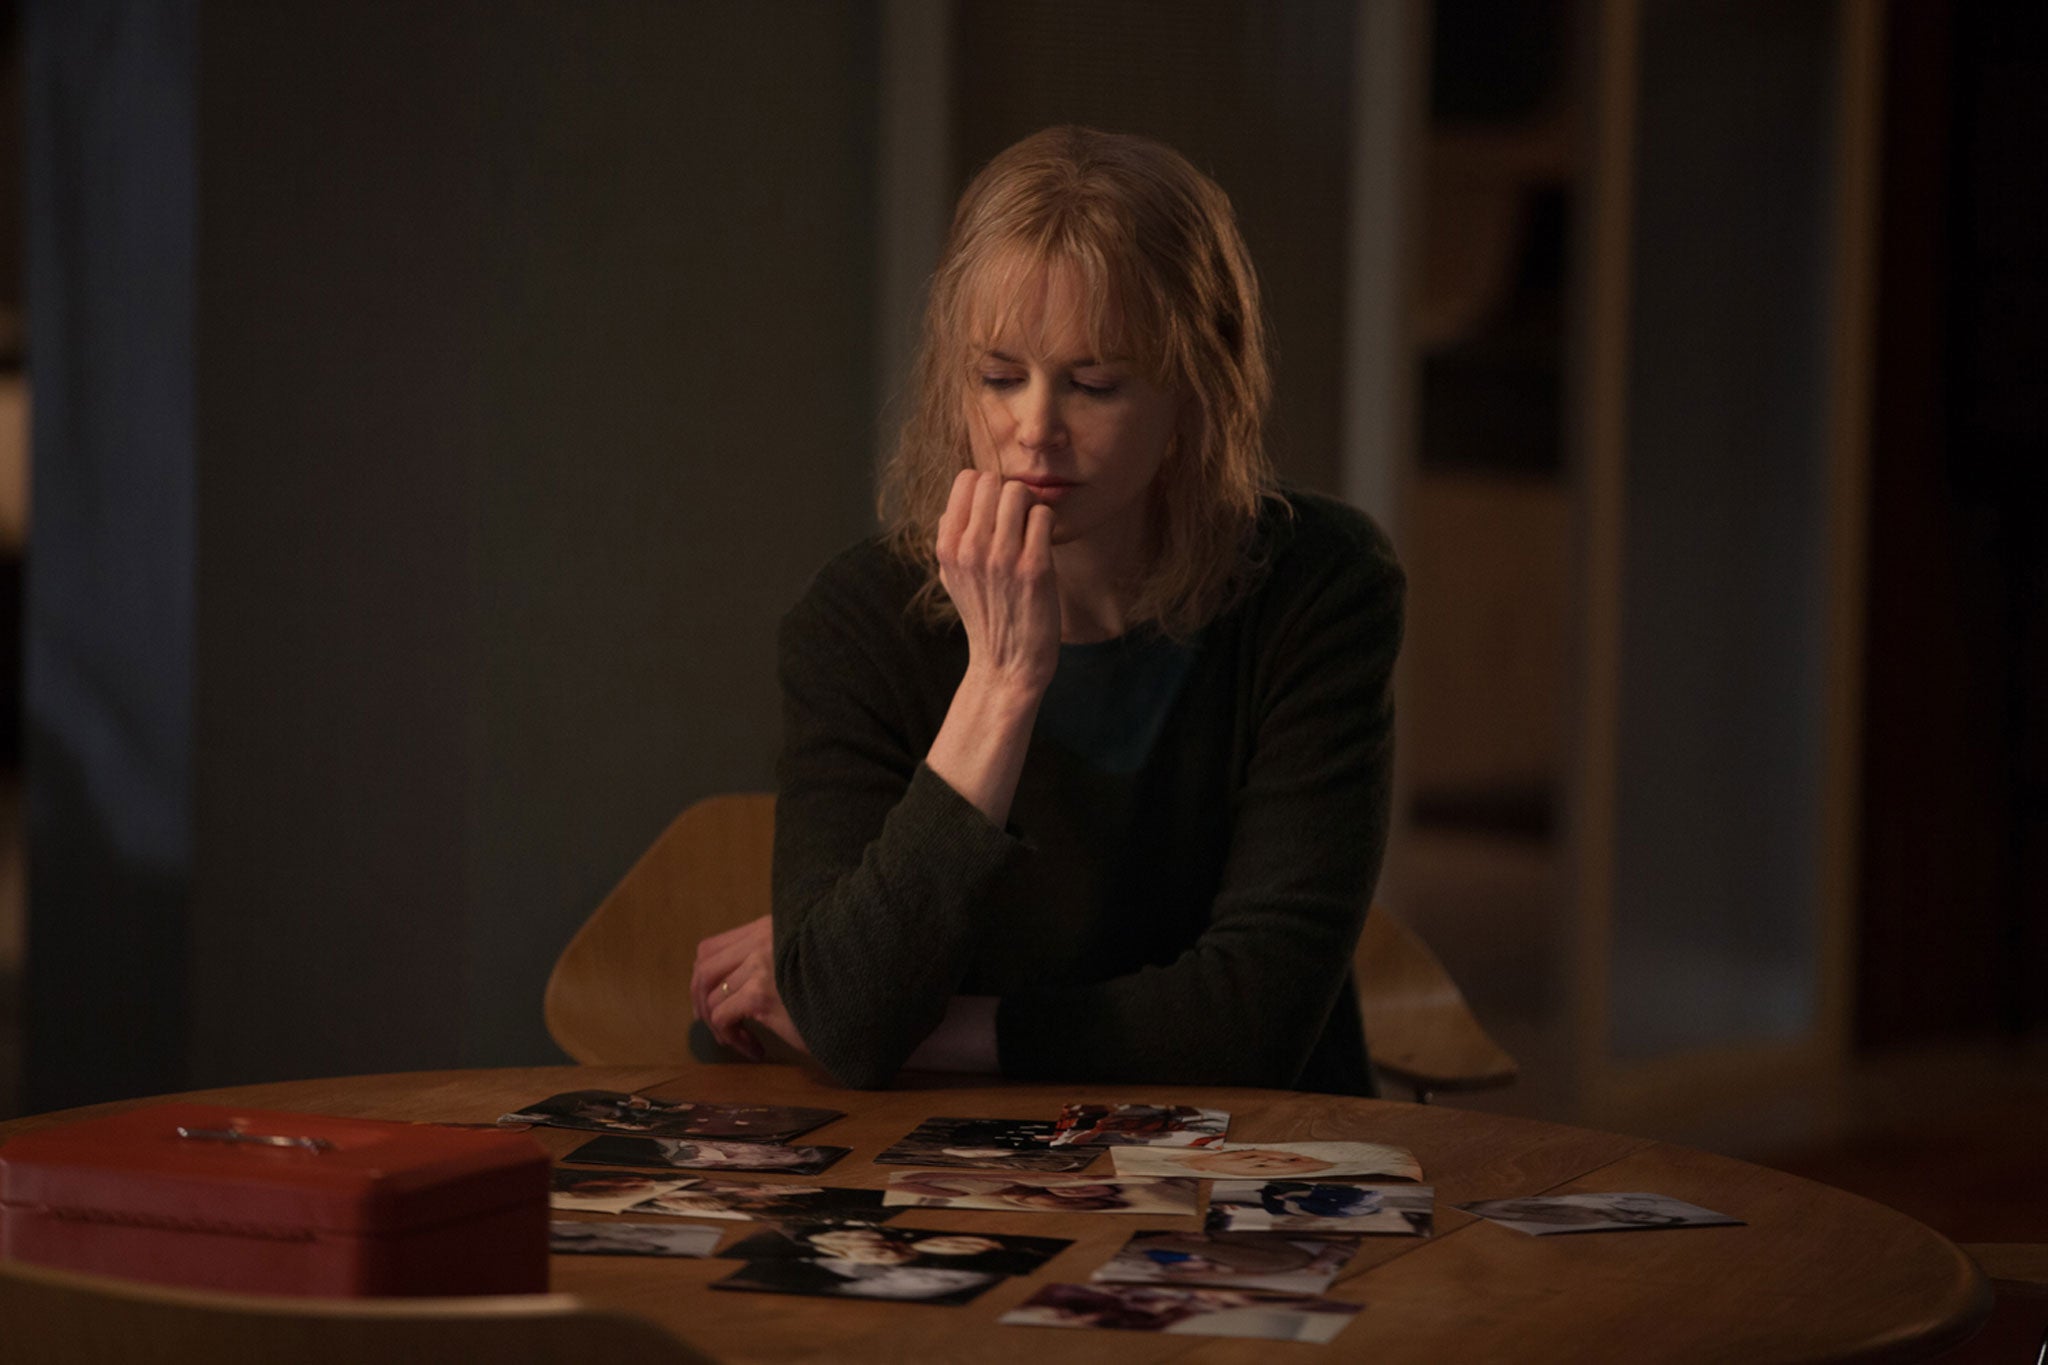 Academy-Award winner Nicole Kidman as Christine, a role which required extensive research into psychogenic amnesia